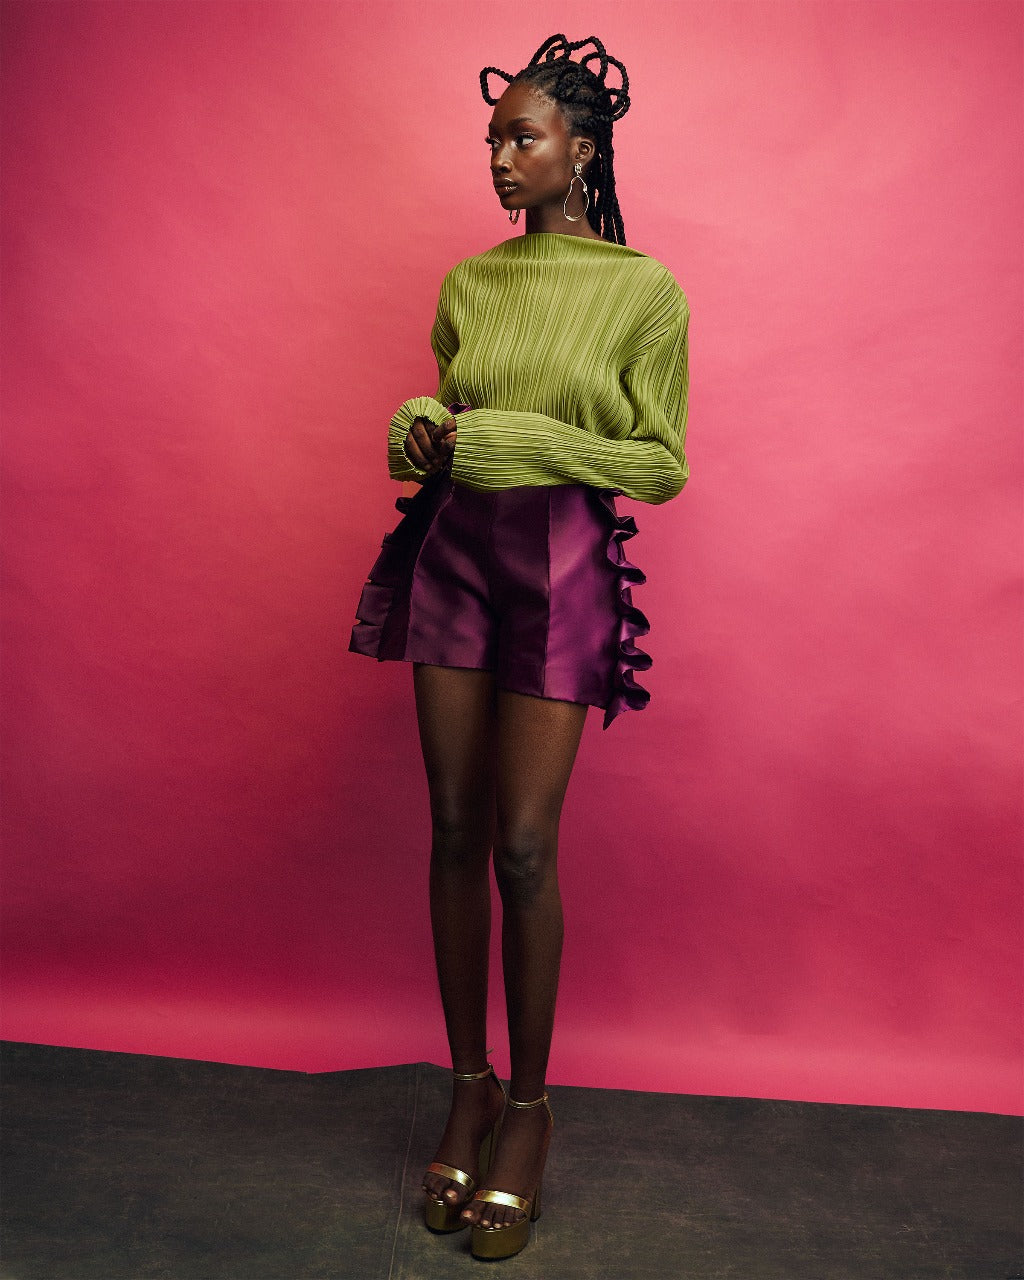 A model wearing a Chartreuse top and Aubergine colored shorts with ruffles in a red room